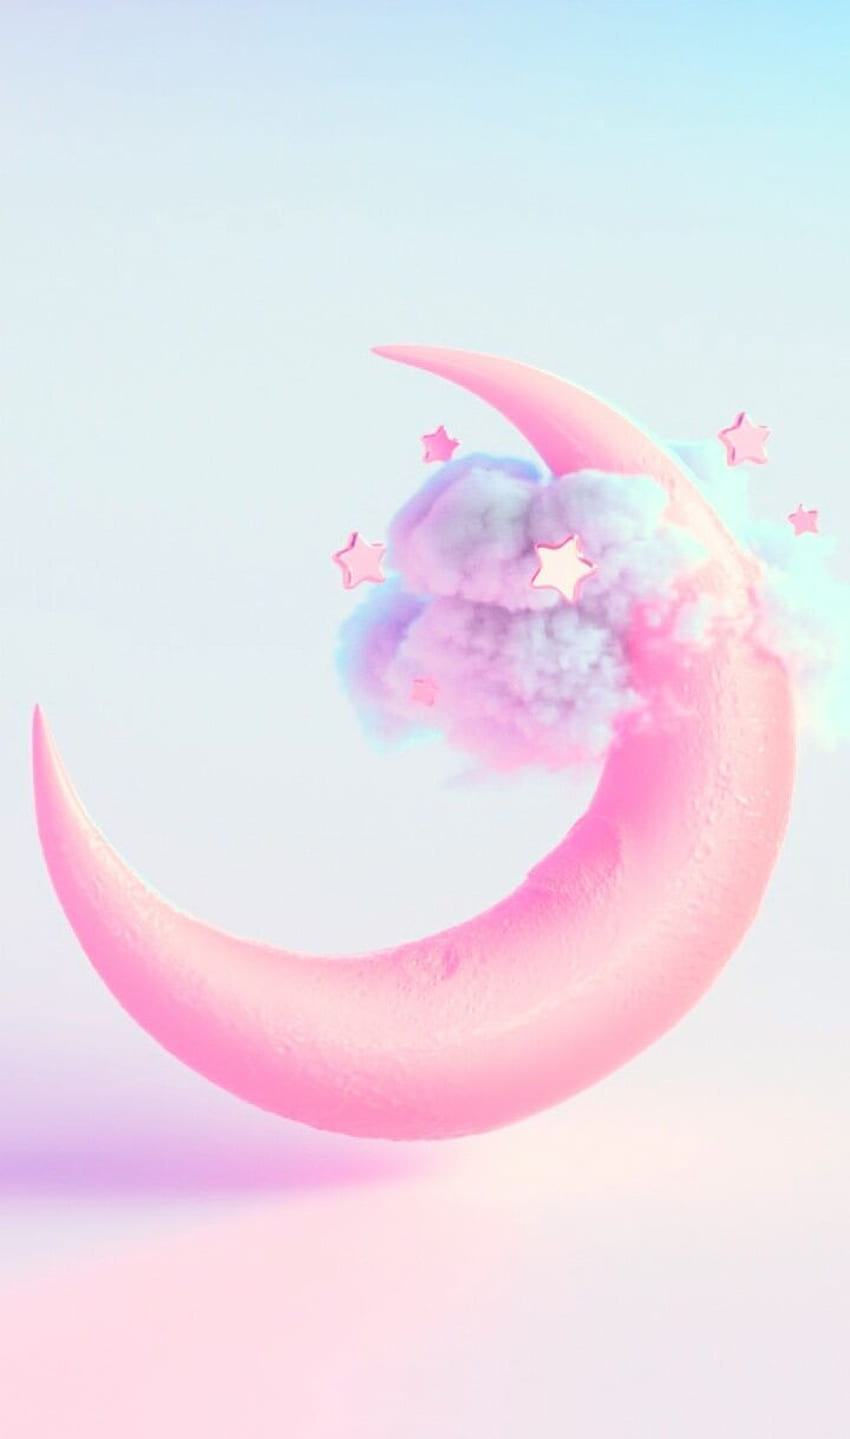 A pink moon with clouds and stars in the background - 3D